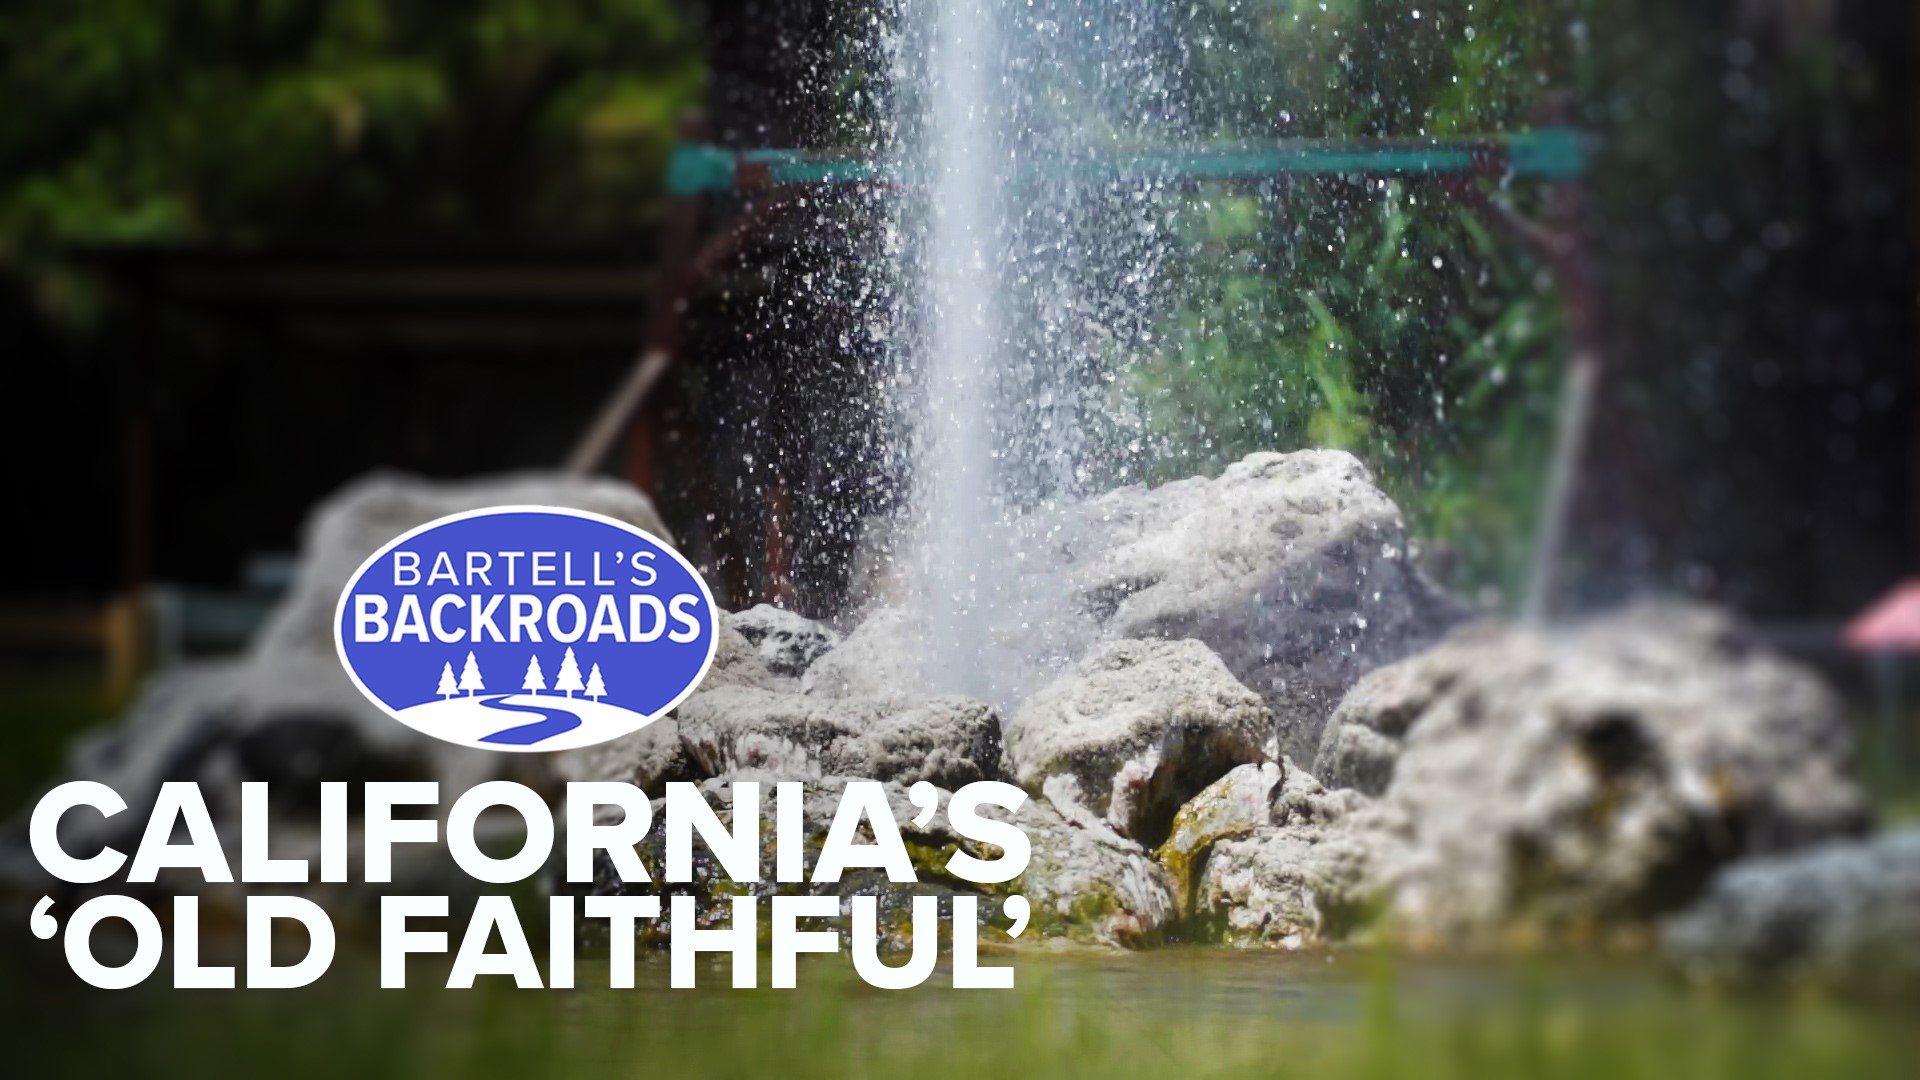 One of three 'old faithful' geysers in the world is a daytrip away from Sacramento in Napa County.